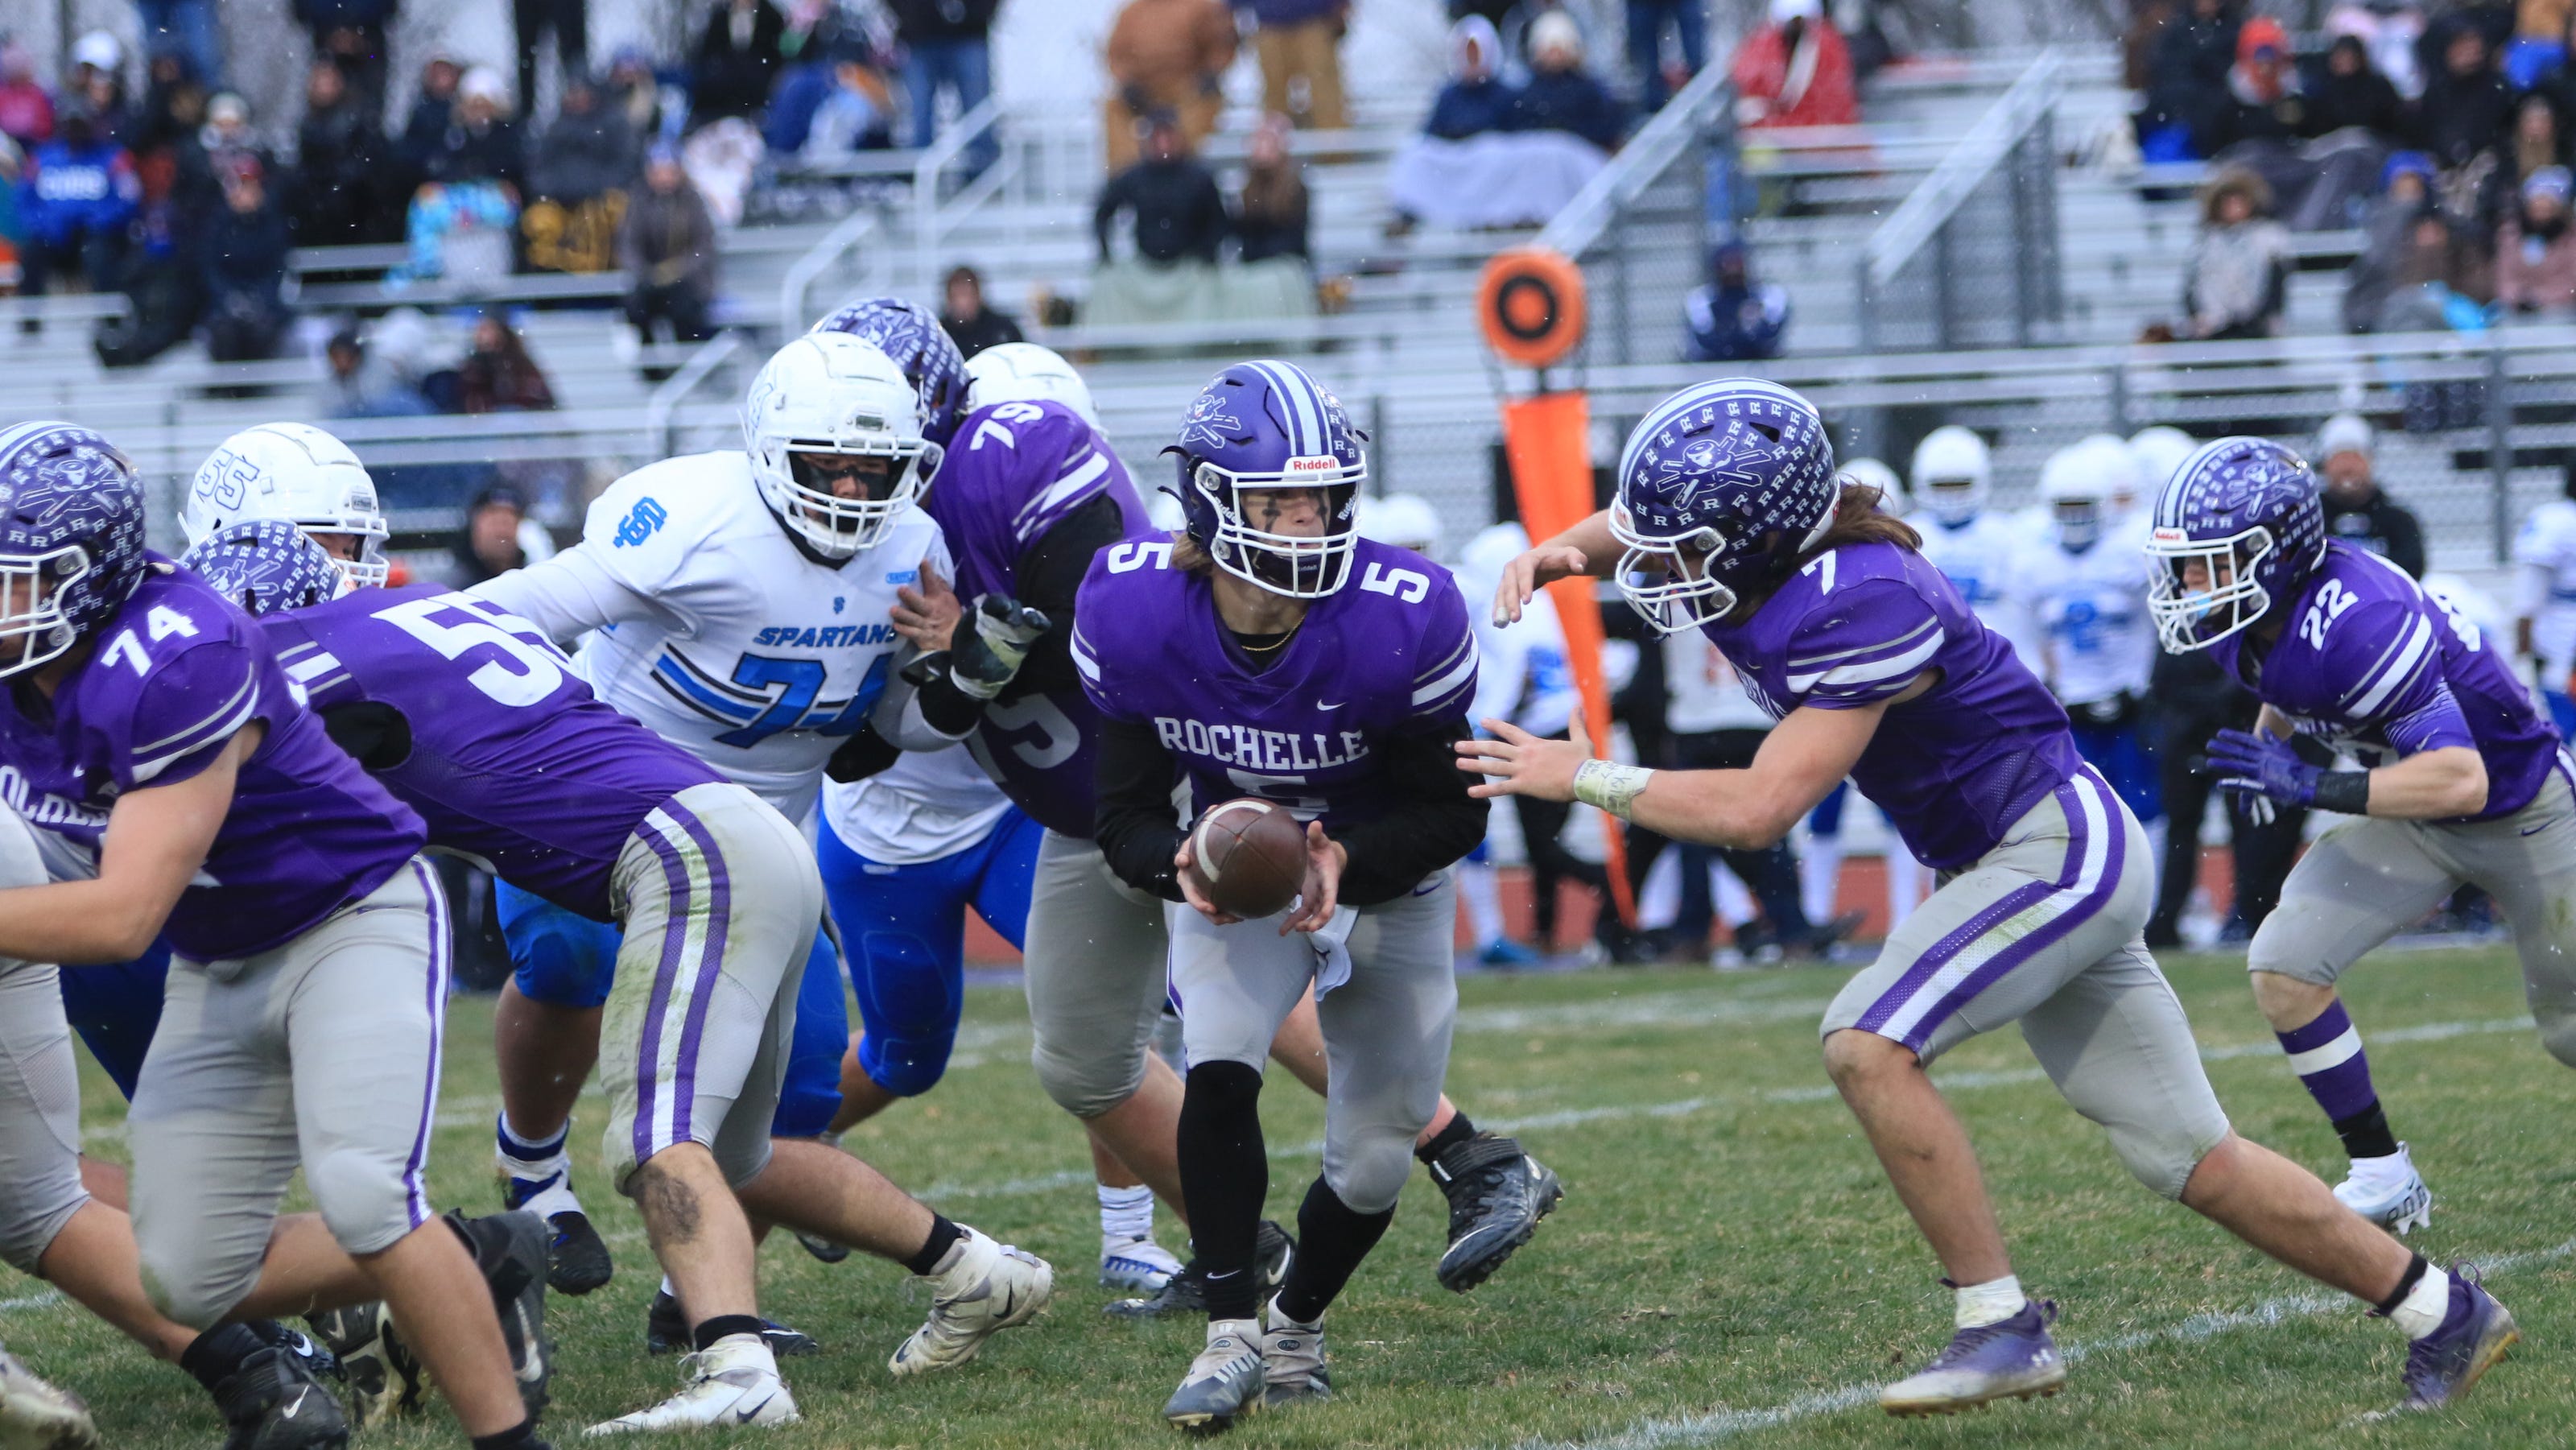 IHSA football playoffs Rochelle loses to Wheaton St. Francis in quarters